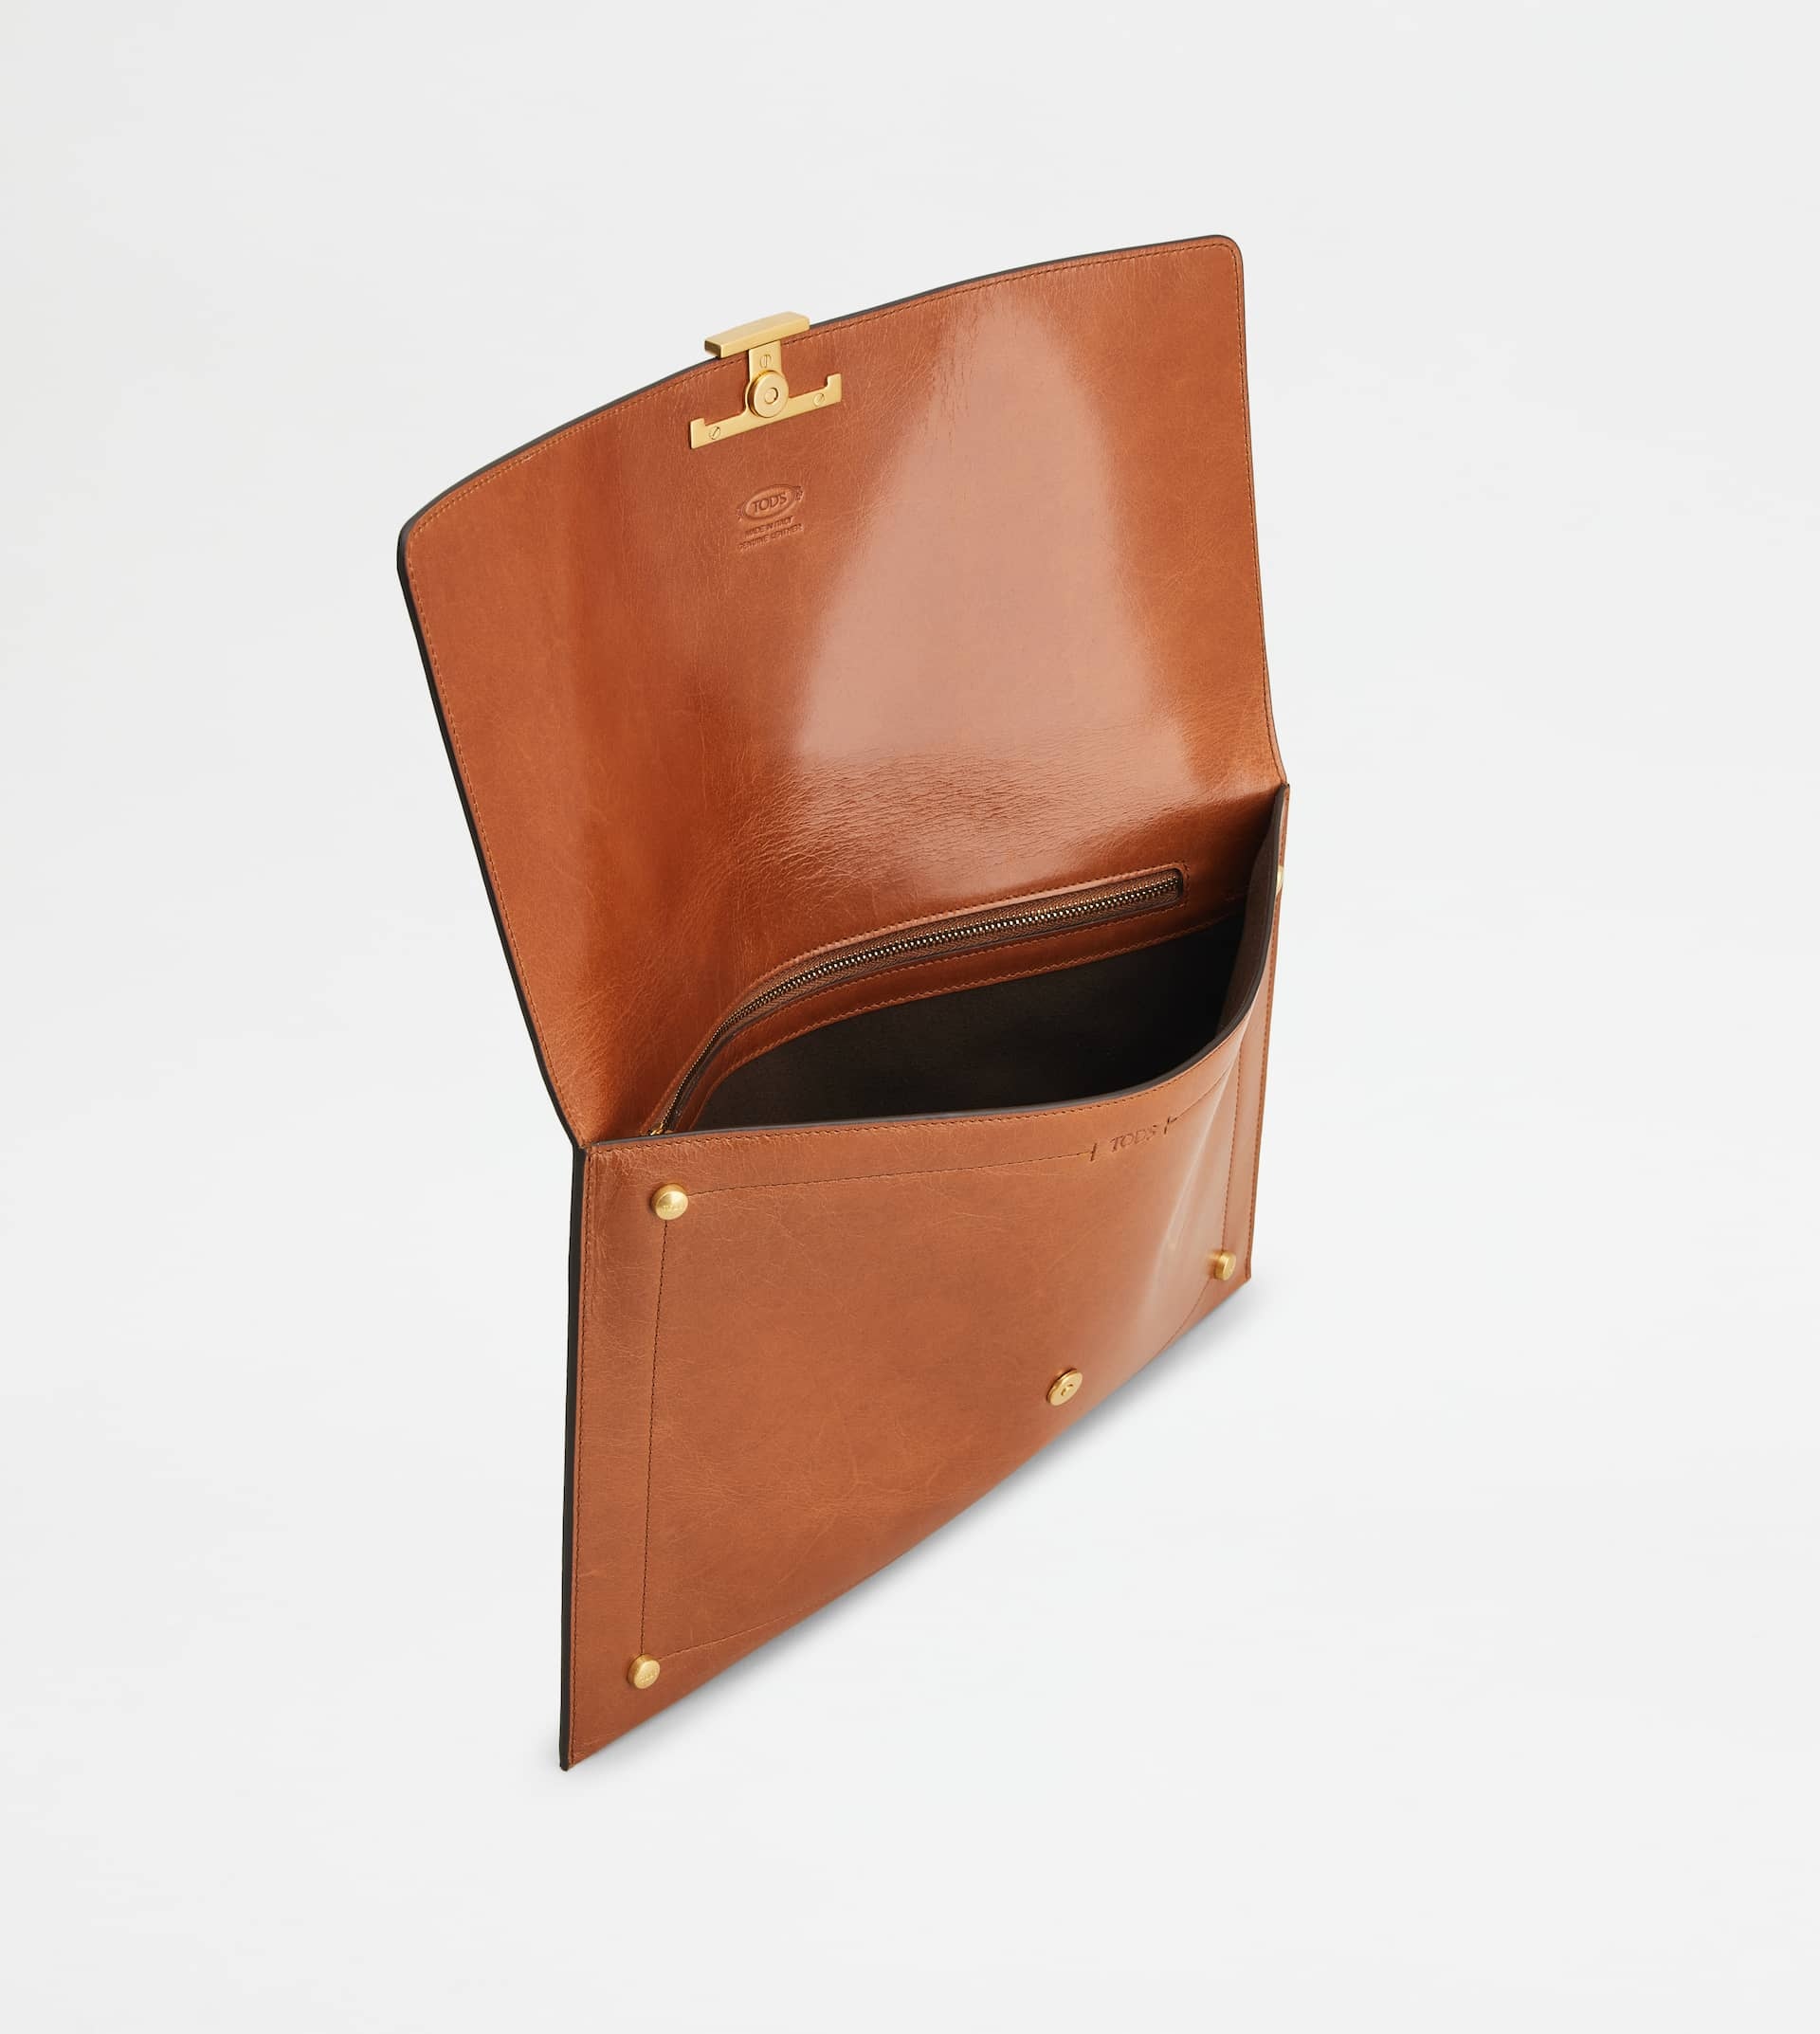 T TIMELESS ENVELOPE CLUTCH IN LEATHER MAXI - BROWN - 2